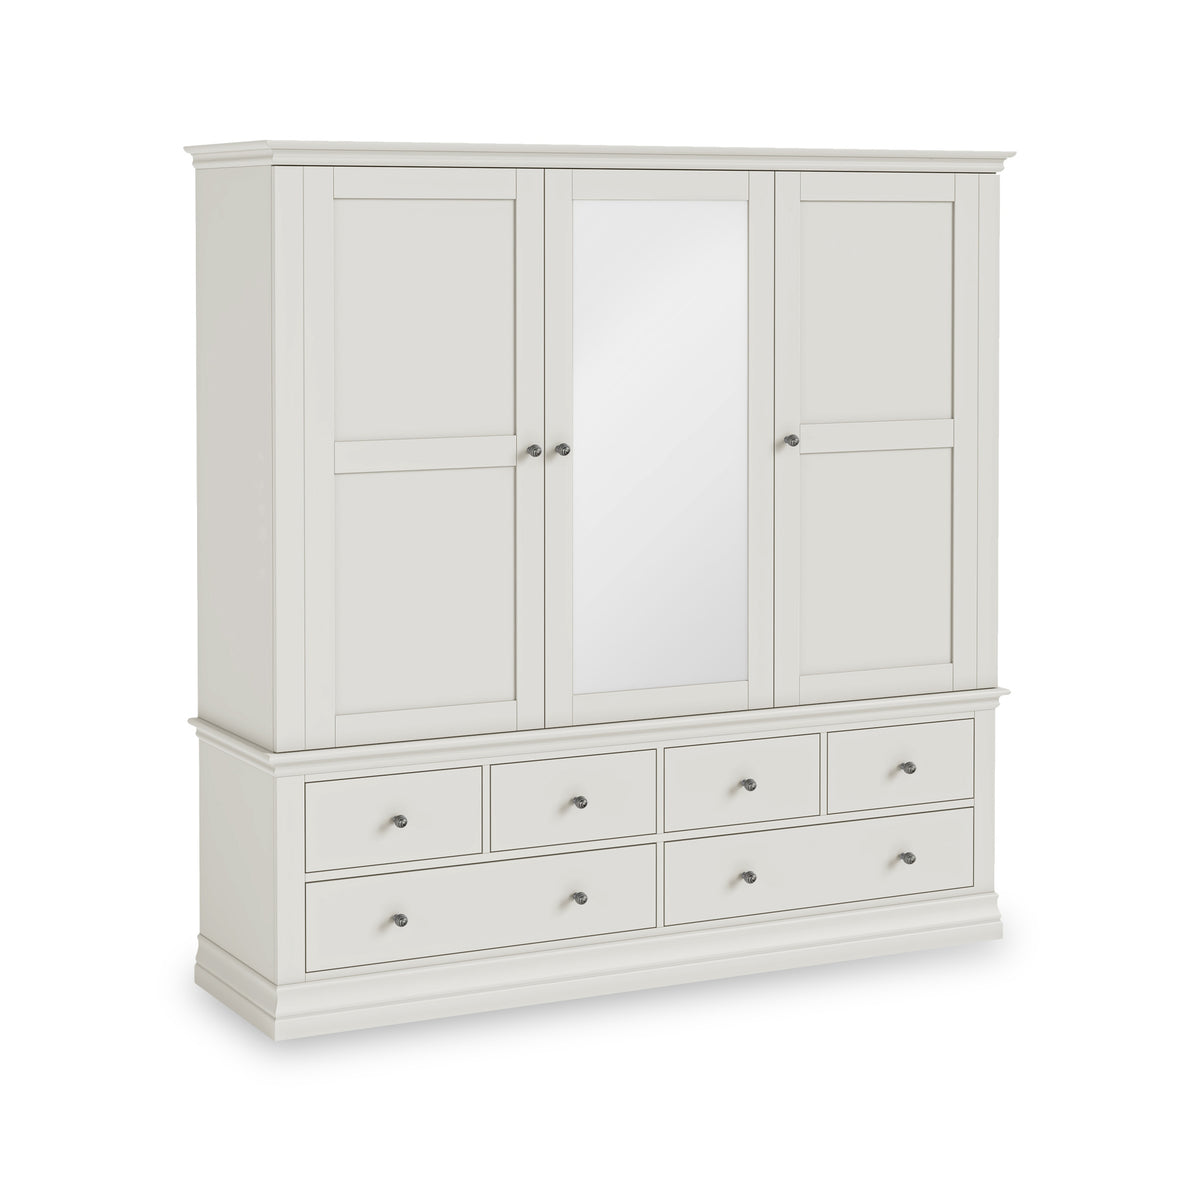 Porter Grey Triple Wardrobe with 6 Drawers from Roseland Furniture